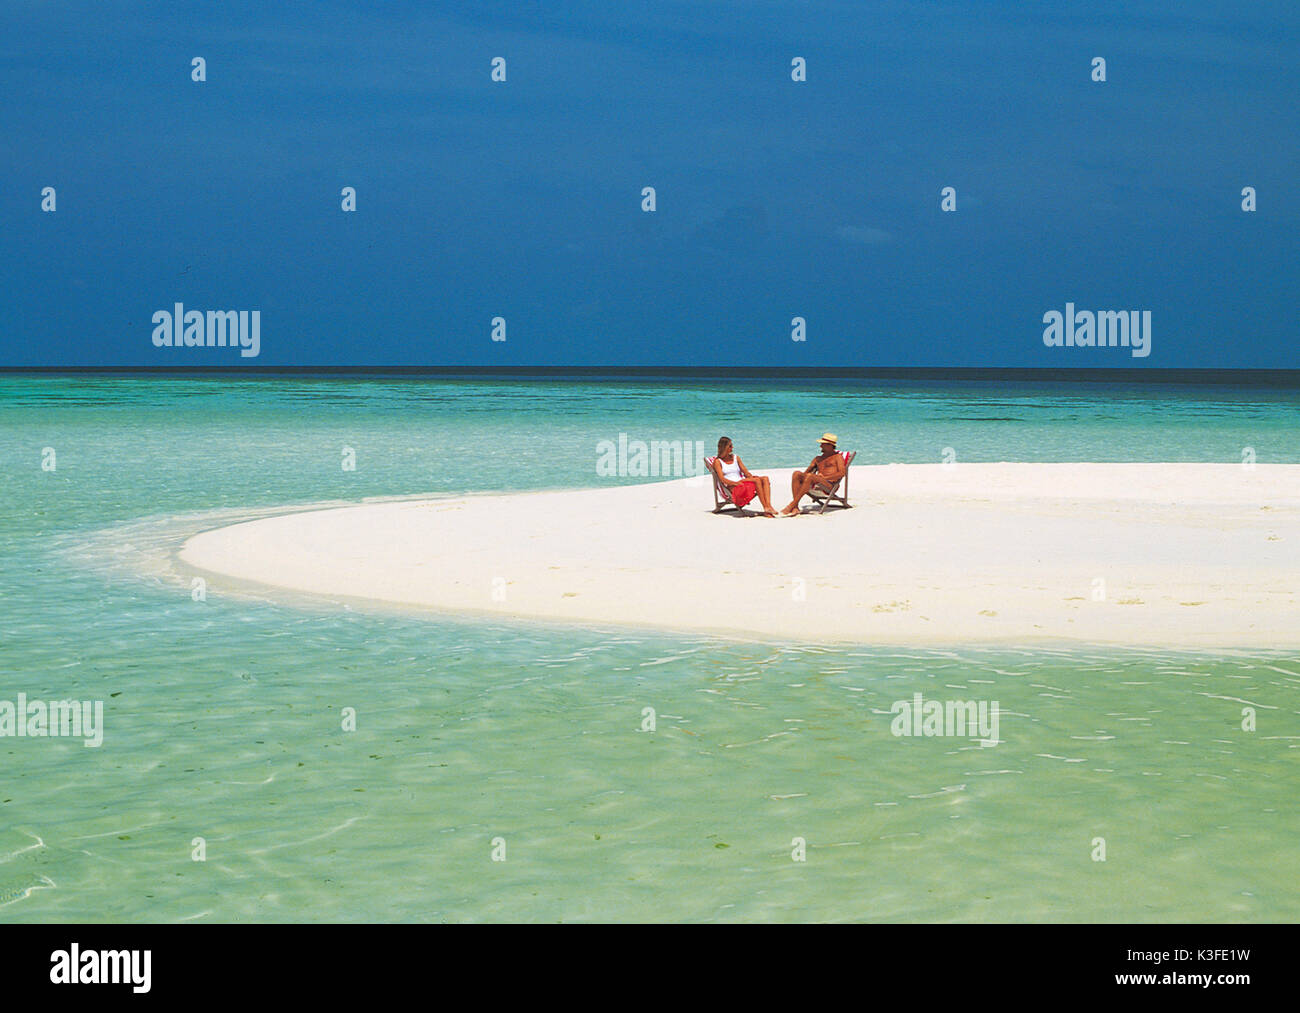 A pair on a lonesome Sand bank Stock Photo